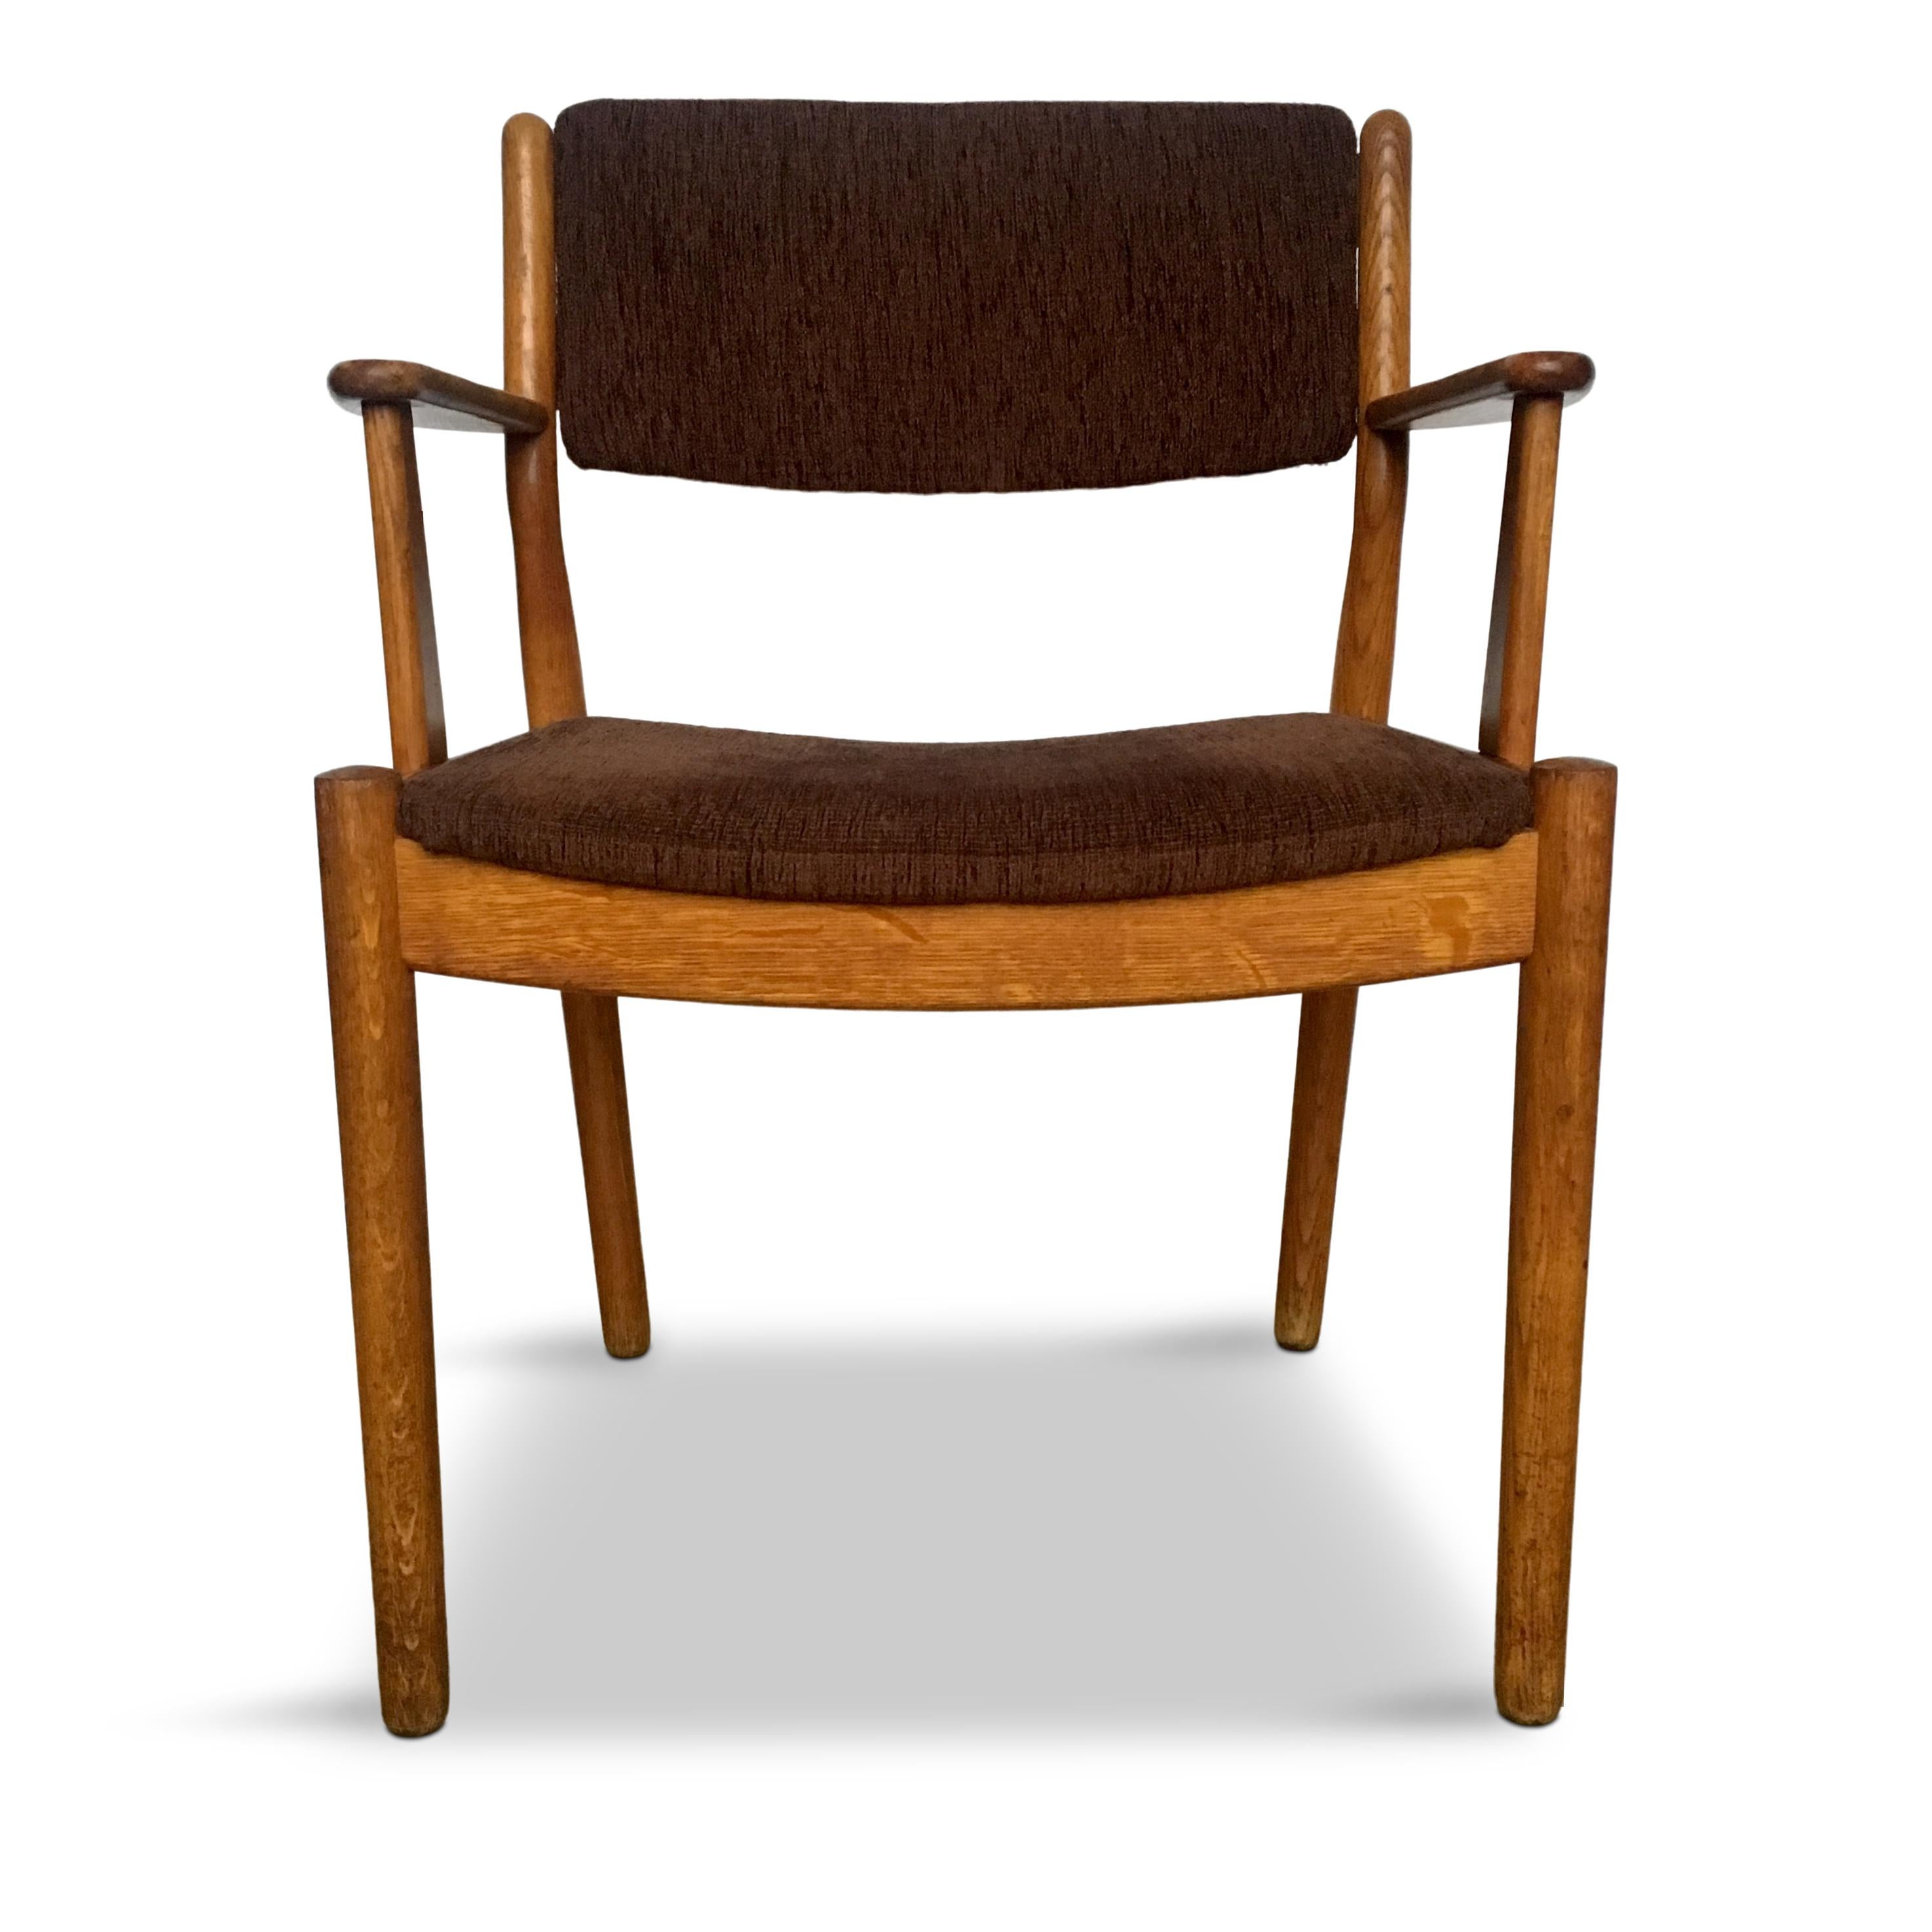 Danish design, oak and fabric armchair. 

Original vintage condition, cleaned and oil-restored

This model was designed in 1954 by Poul Volther for FDB and was published in their 1955 catalogue (the photos are from the catalogue)

Measures: H